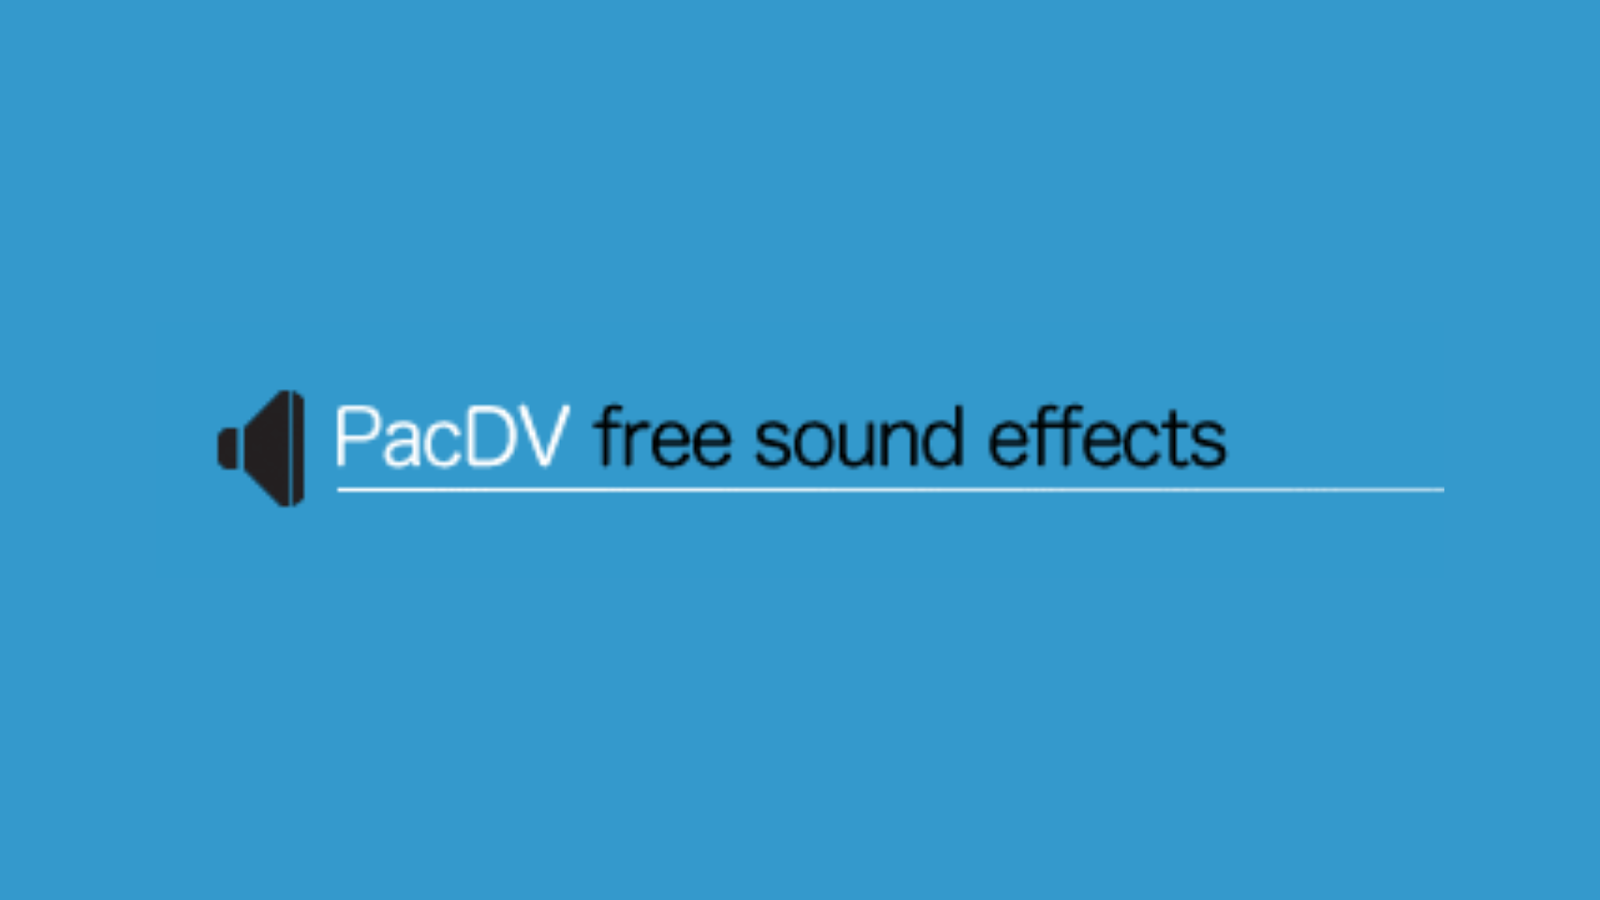 pacdv free sound effects site